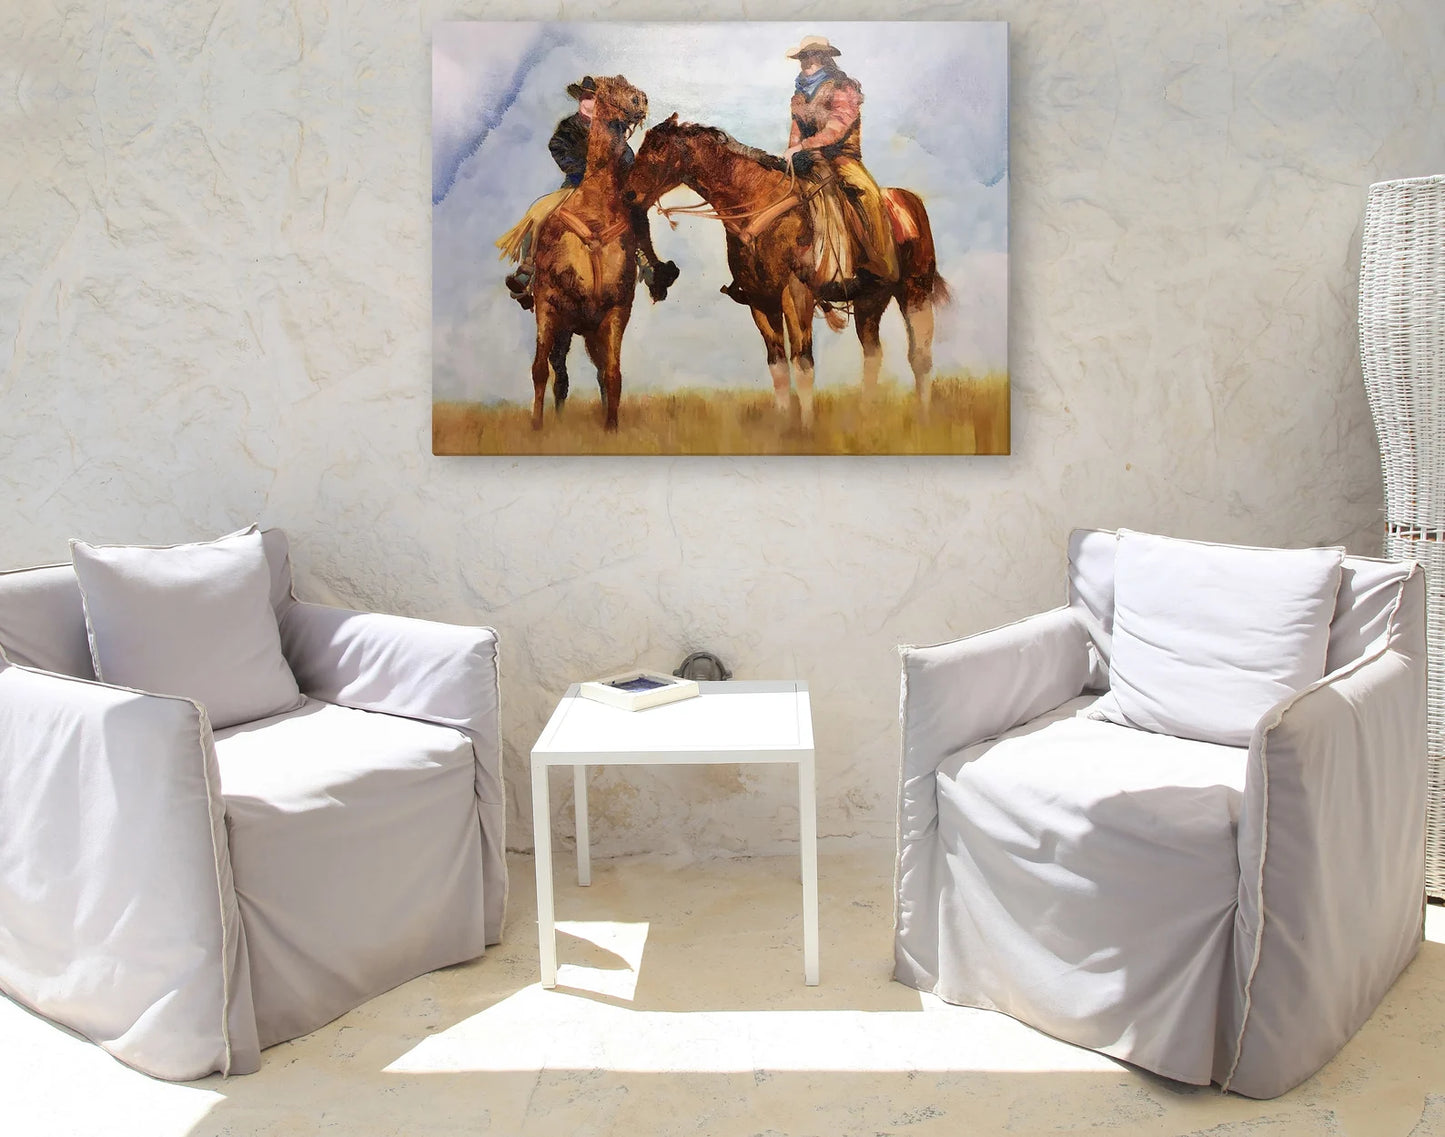 Original "Western Cowboys: On the Prairie" Hand Painted Artwork for Living Room, Bedroom, Foyer, Bar or Office - Framed Canvas